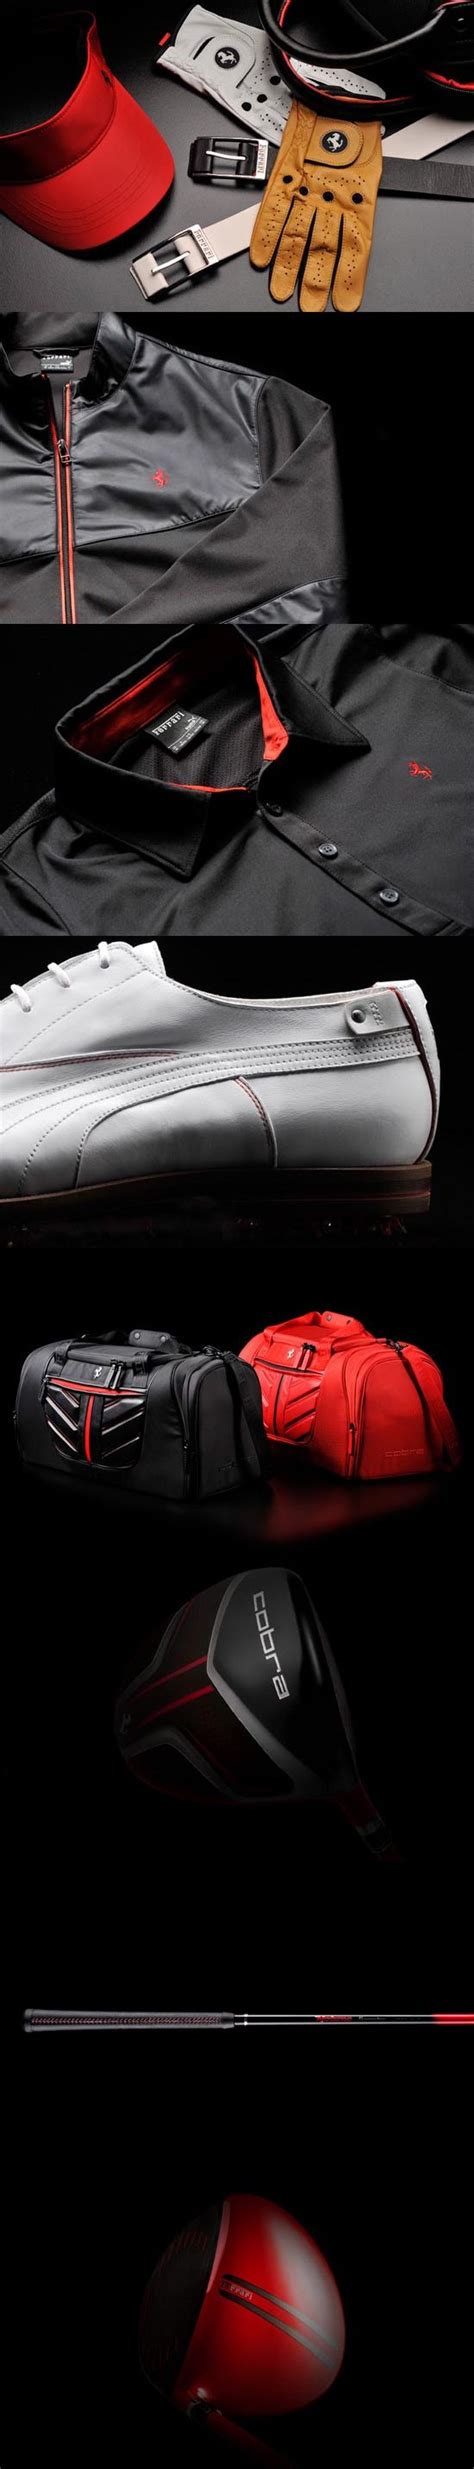 Looking for golf clubs to improve your game? Ferrari Golf Gear Collection